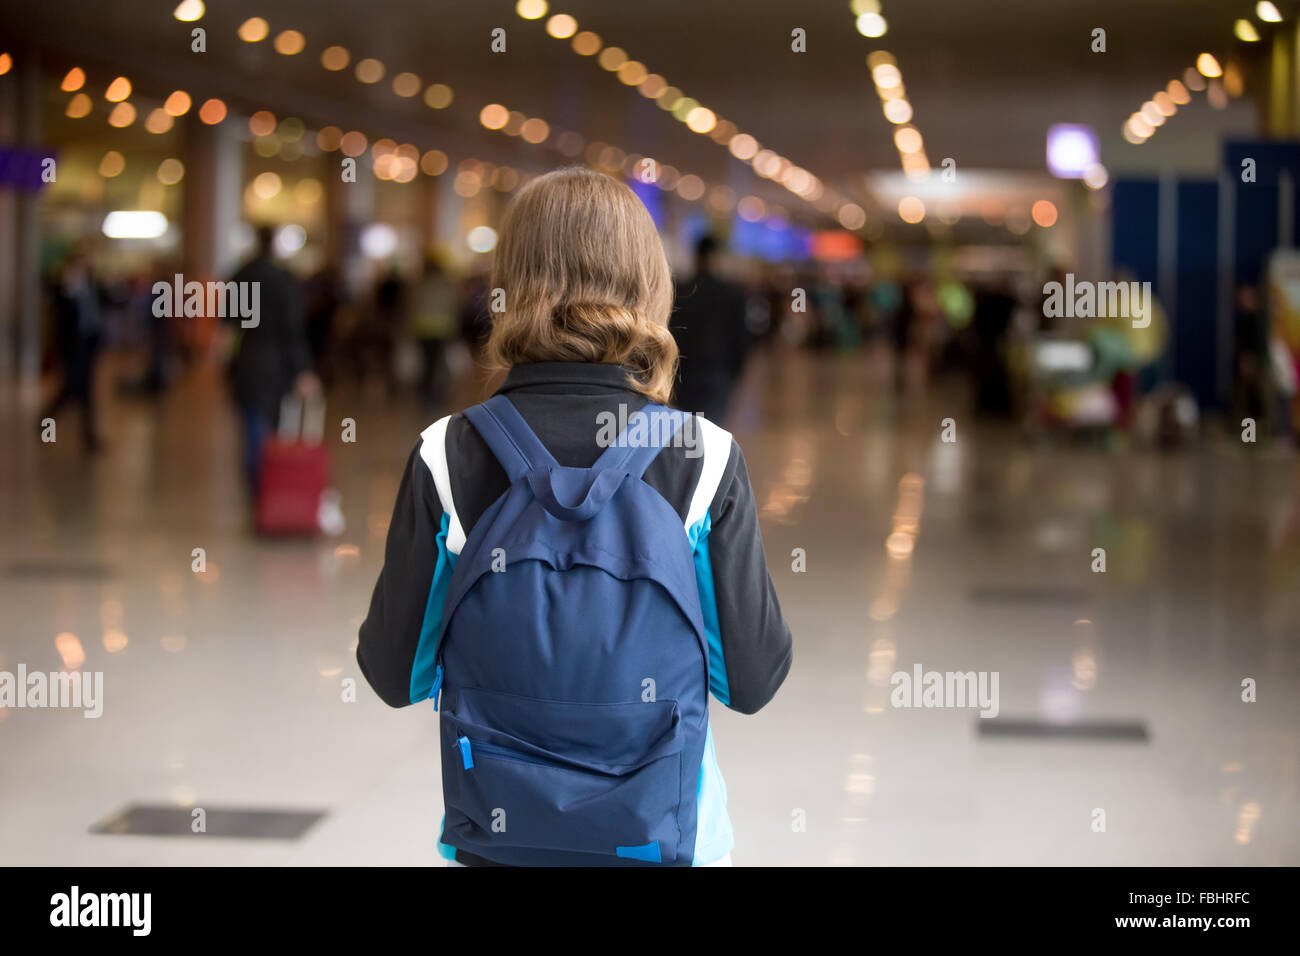 Young woman in 20s with backpack walking in airport terminal, wearing casual style clothes, rear view Stock Photo